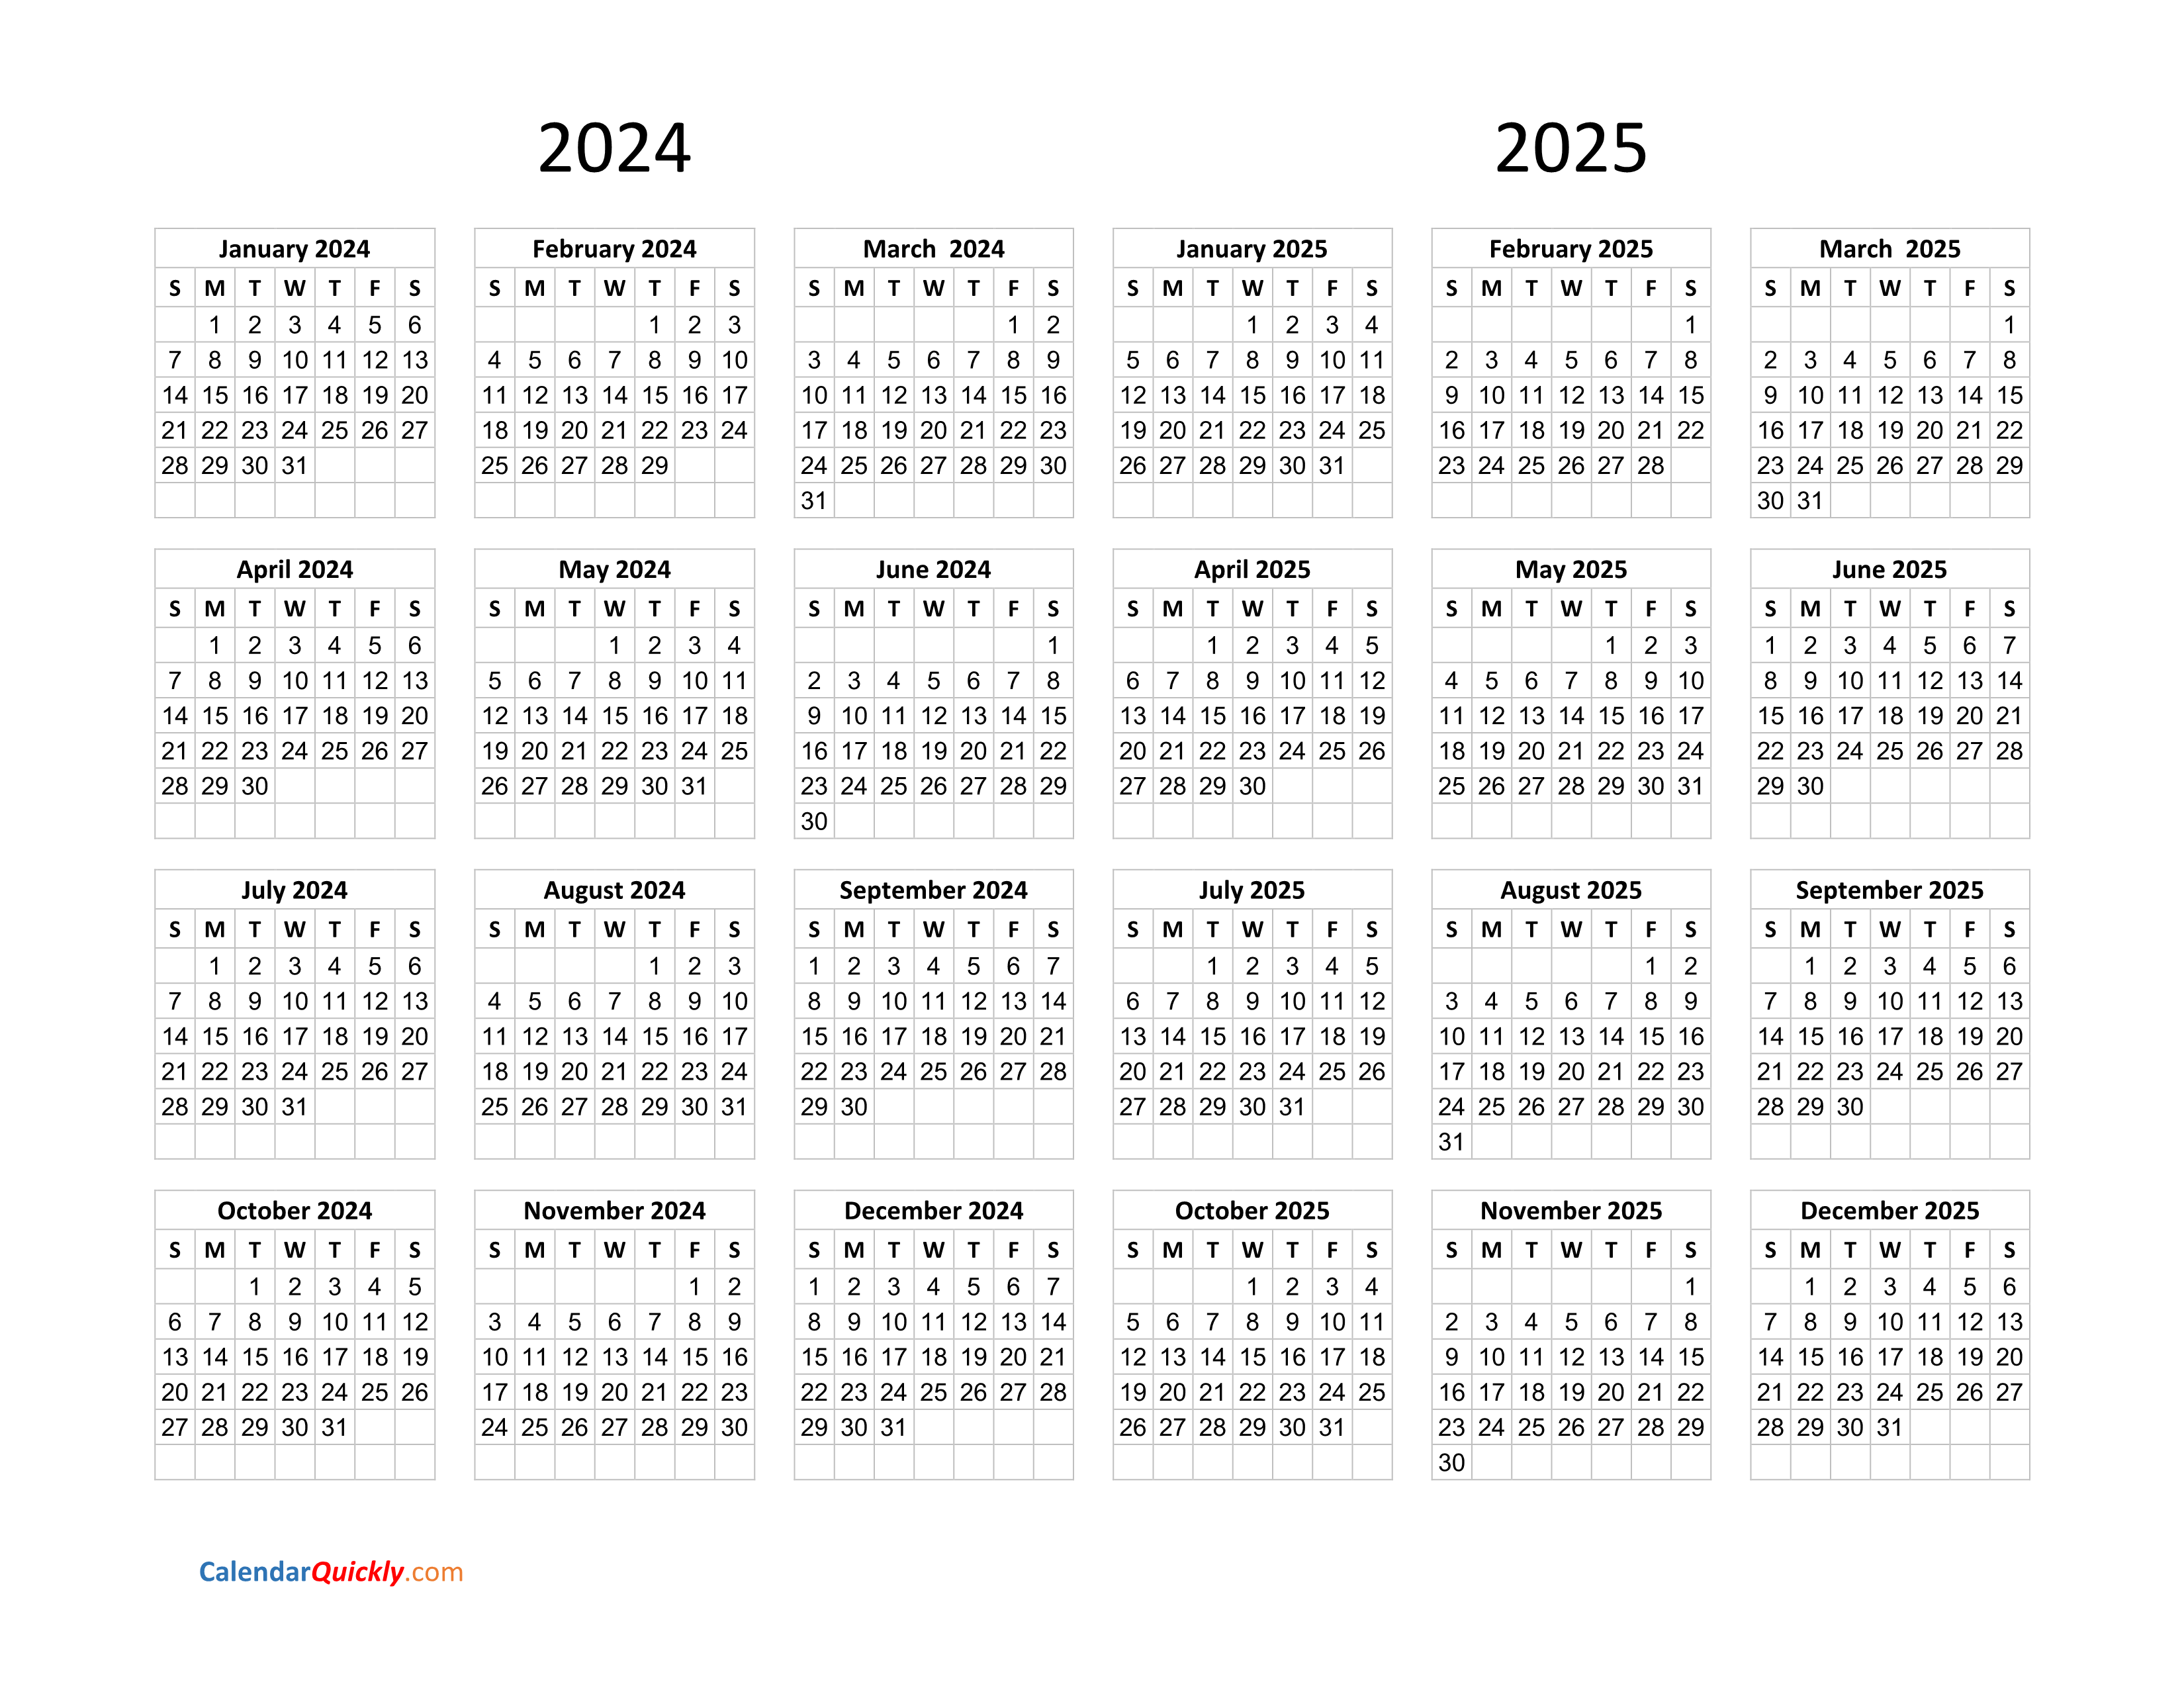 Calendar 2024 And 2025 On One Page Calendar Quickly